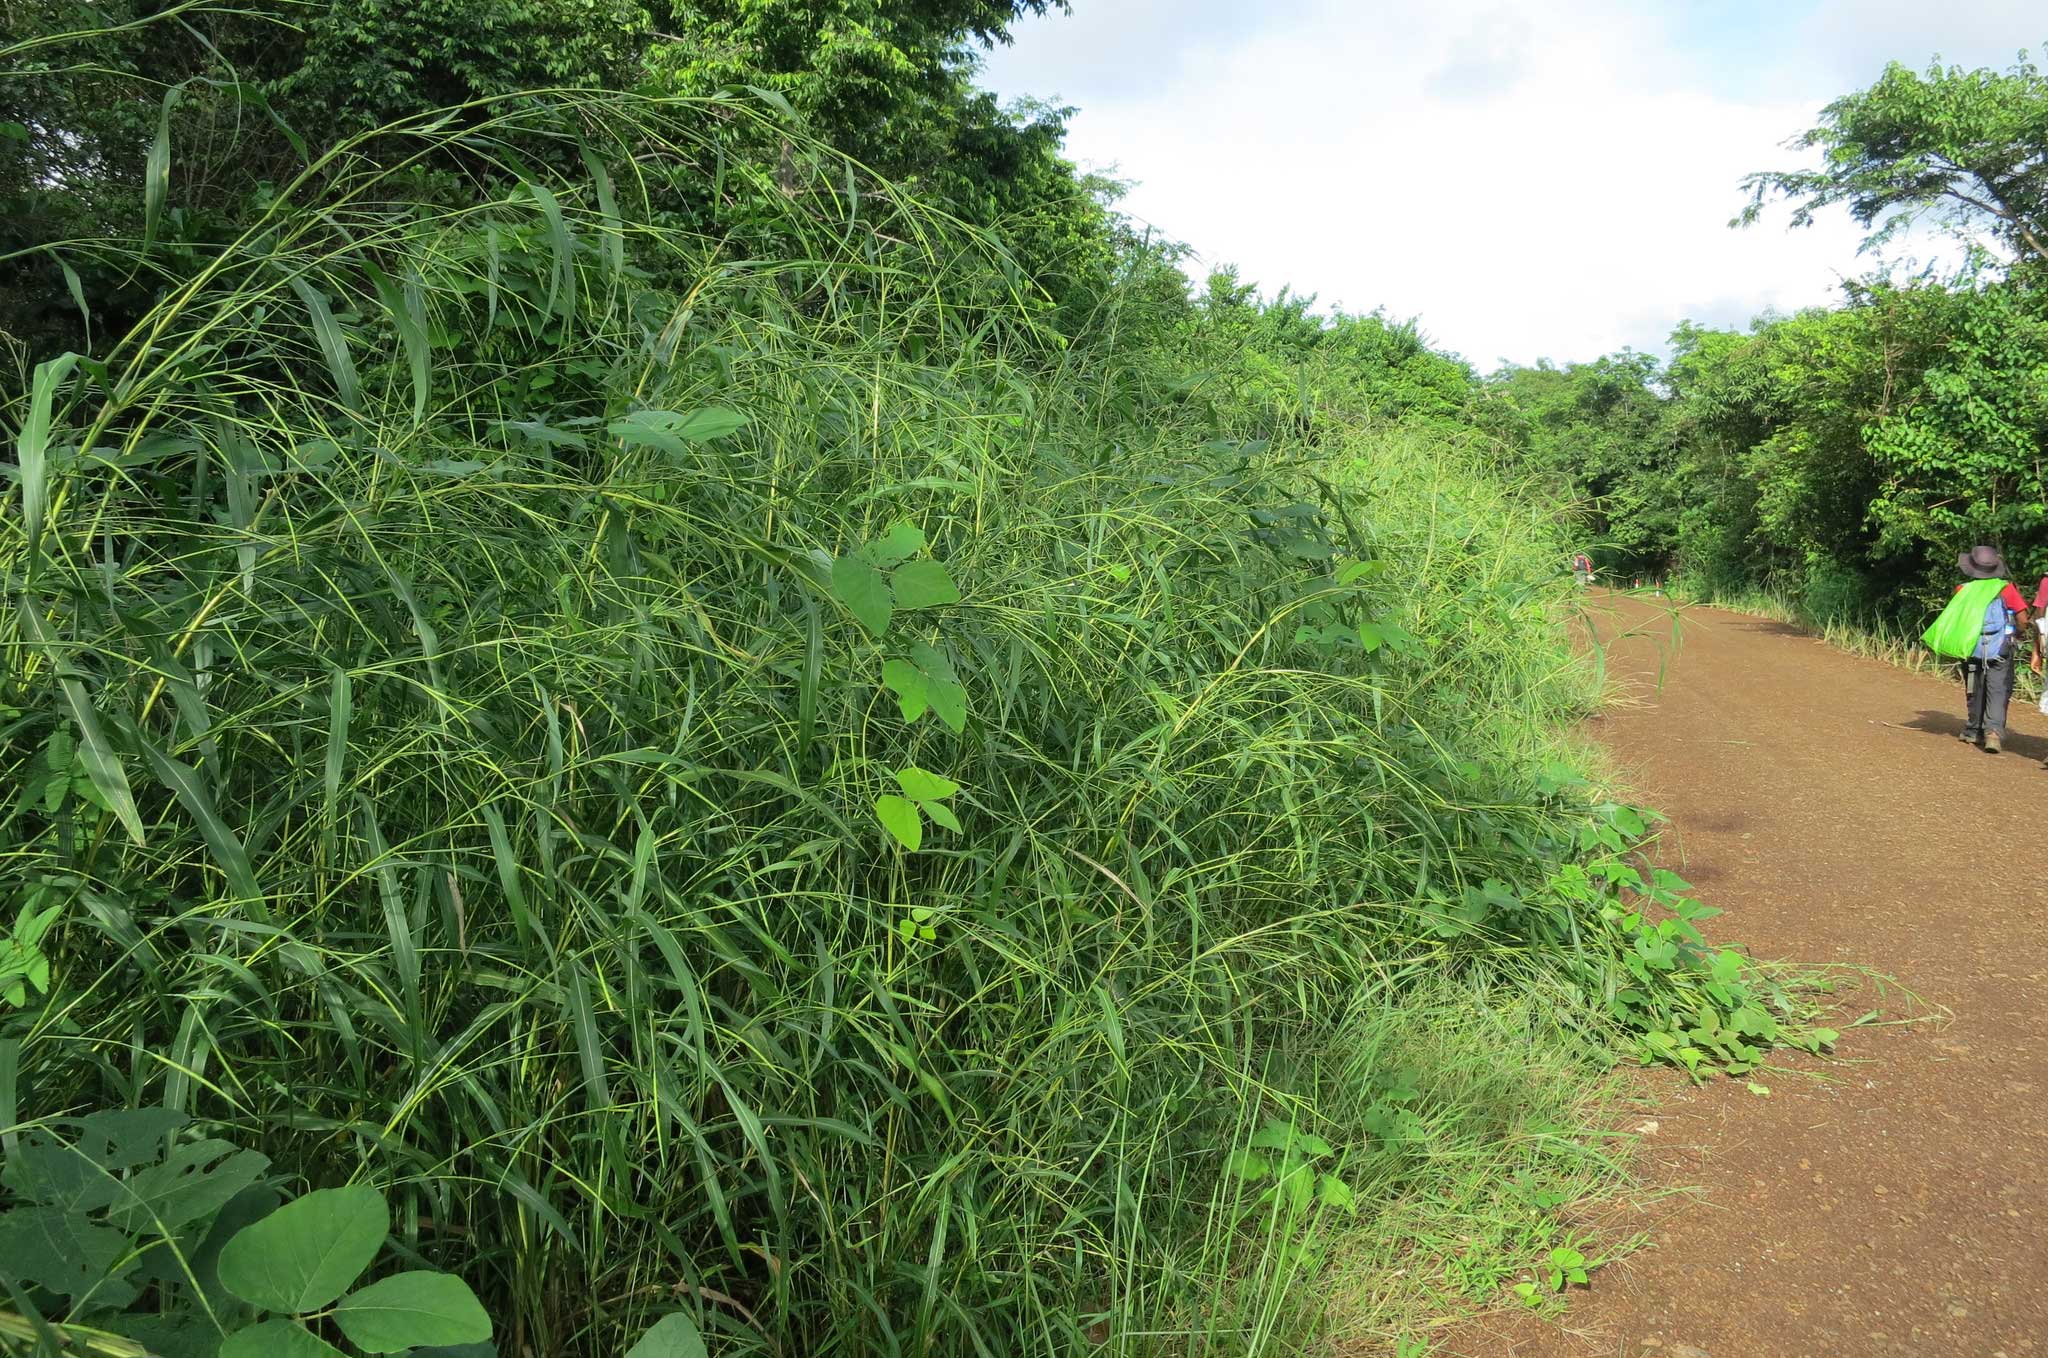 Photograph of itchgrass growing on the left side of a dirt road in Madagascar.  The itchgrass is growing in a thick clump with stems arching toward the road.